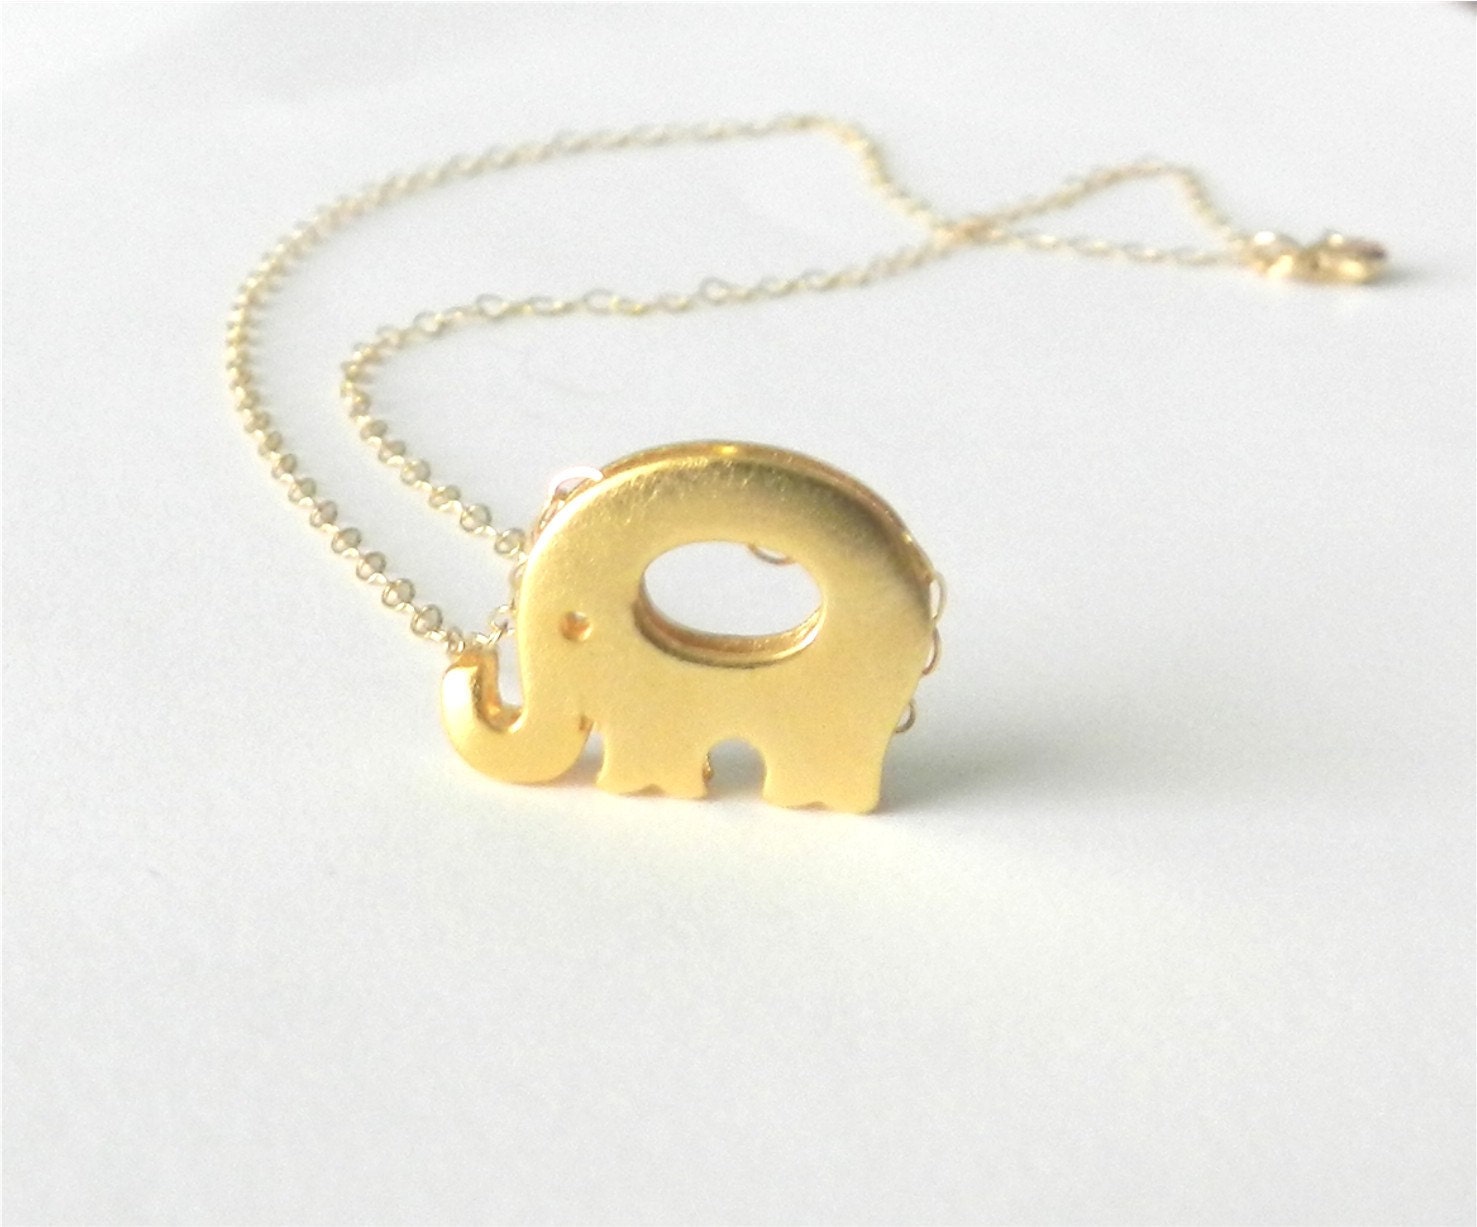 Tiny elephant necklace in gold, lucky little elephant, delicate modern jewelry